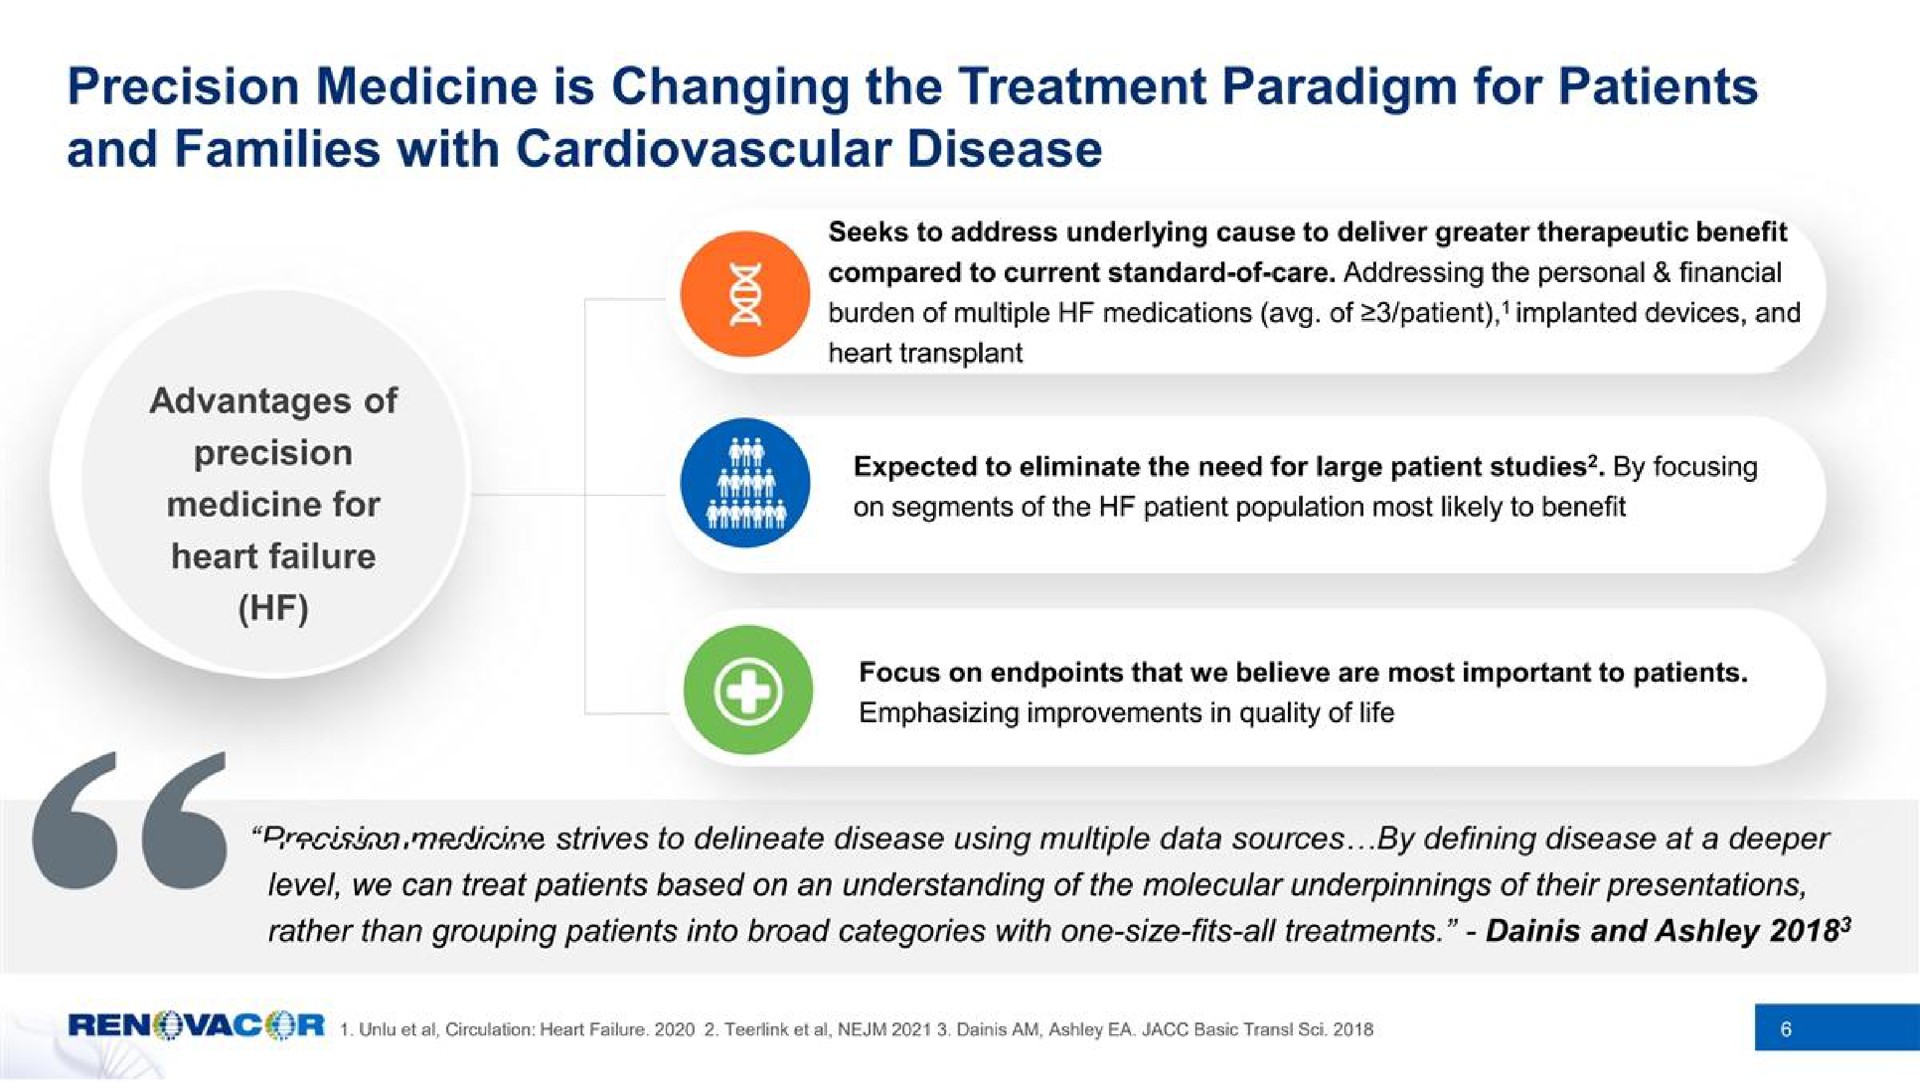 precision medicine is changing the treatment paradigm for patients and families with cardiovascular disease | Renovacor